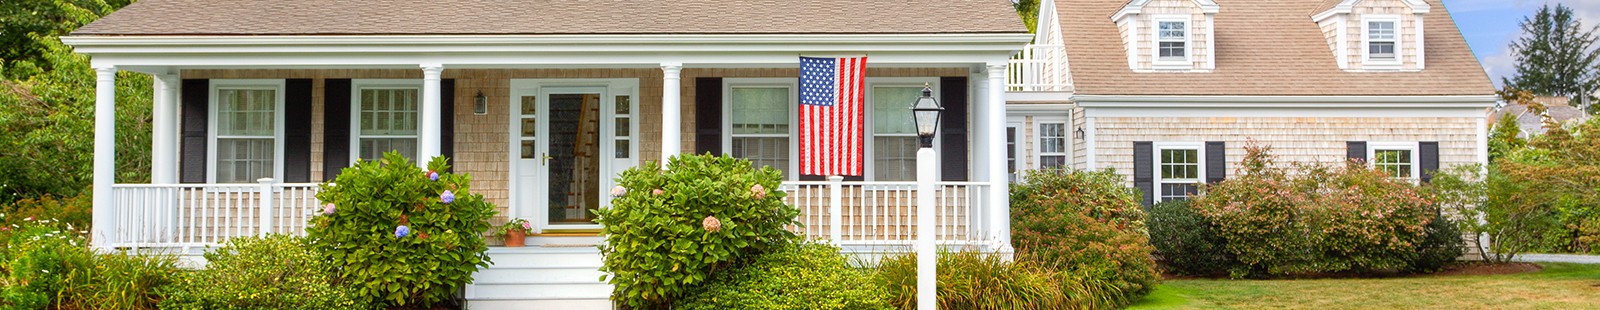 Home with American Flag hanging out front